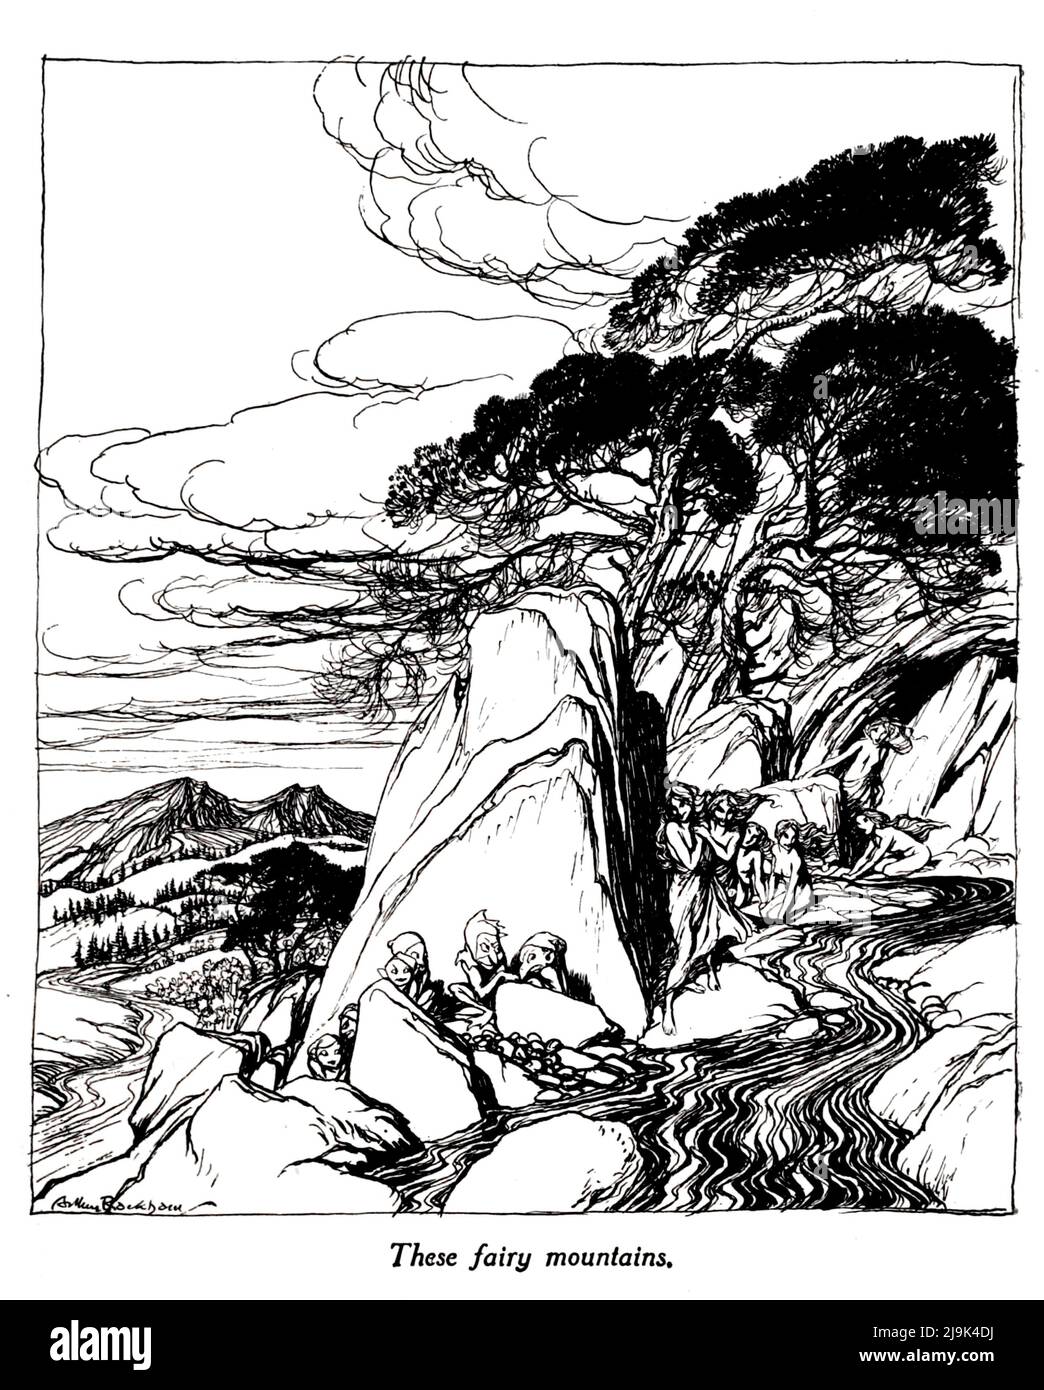 These fairy mountains from the book ' Rip Van Winkle ' by Washington Irving, 1783-1859; Illustrated by Arthur Rackham, 1867-1939 Publication date 1919  Publisher New York Doubleday, Page 'Rip Van Winkle' is a short story by the American author Washington Irving, first published in 1819. It follows a Dutch-American villager in colonial America named Rip Van Winkle who meets mysterious Dutchmen, imbibes their liquor and falls asleep in the Catskill Mountains. He awakes 20 years later to a very changed world, having missed the American Revolution. Stock Photo